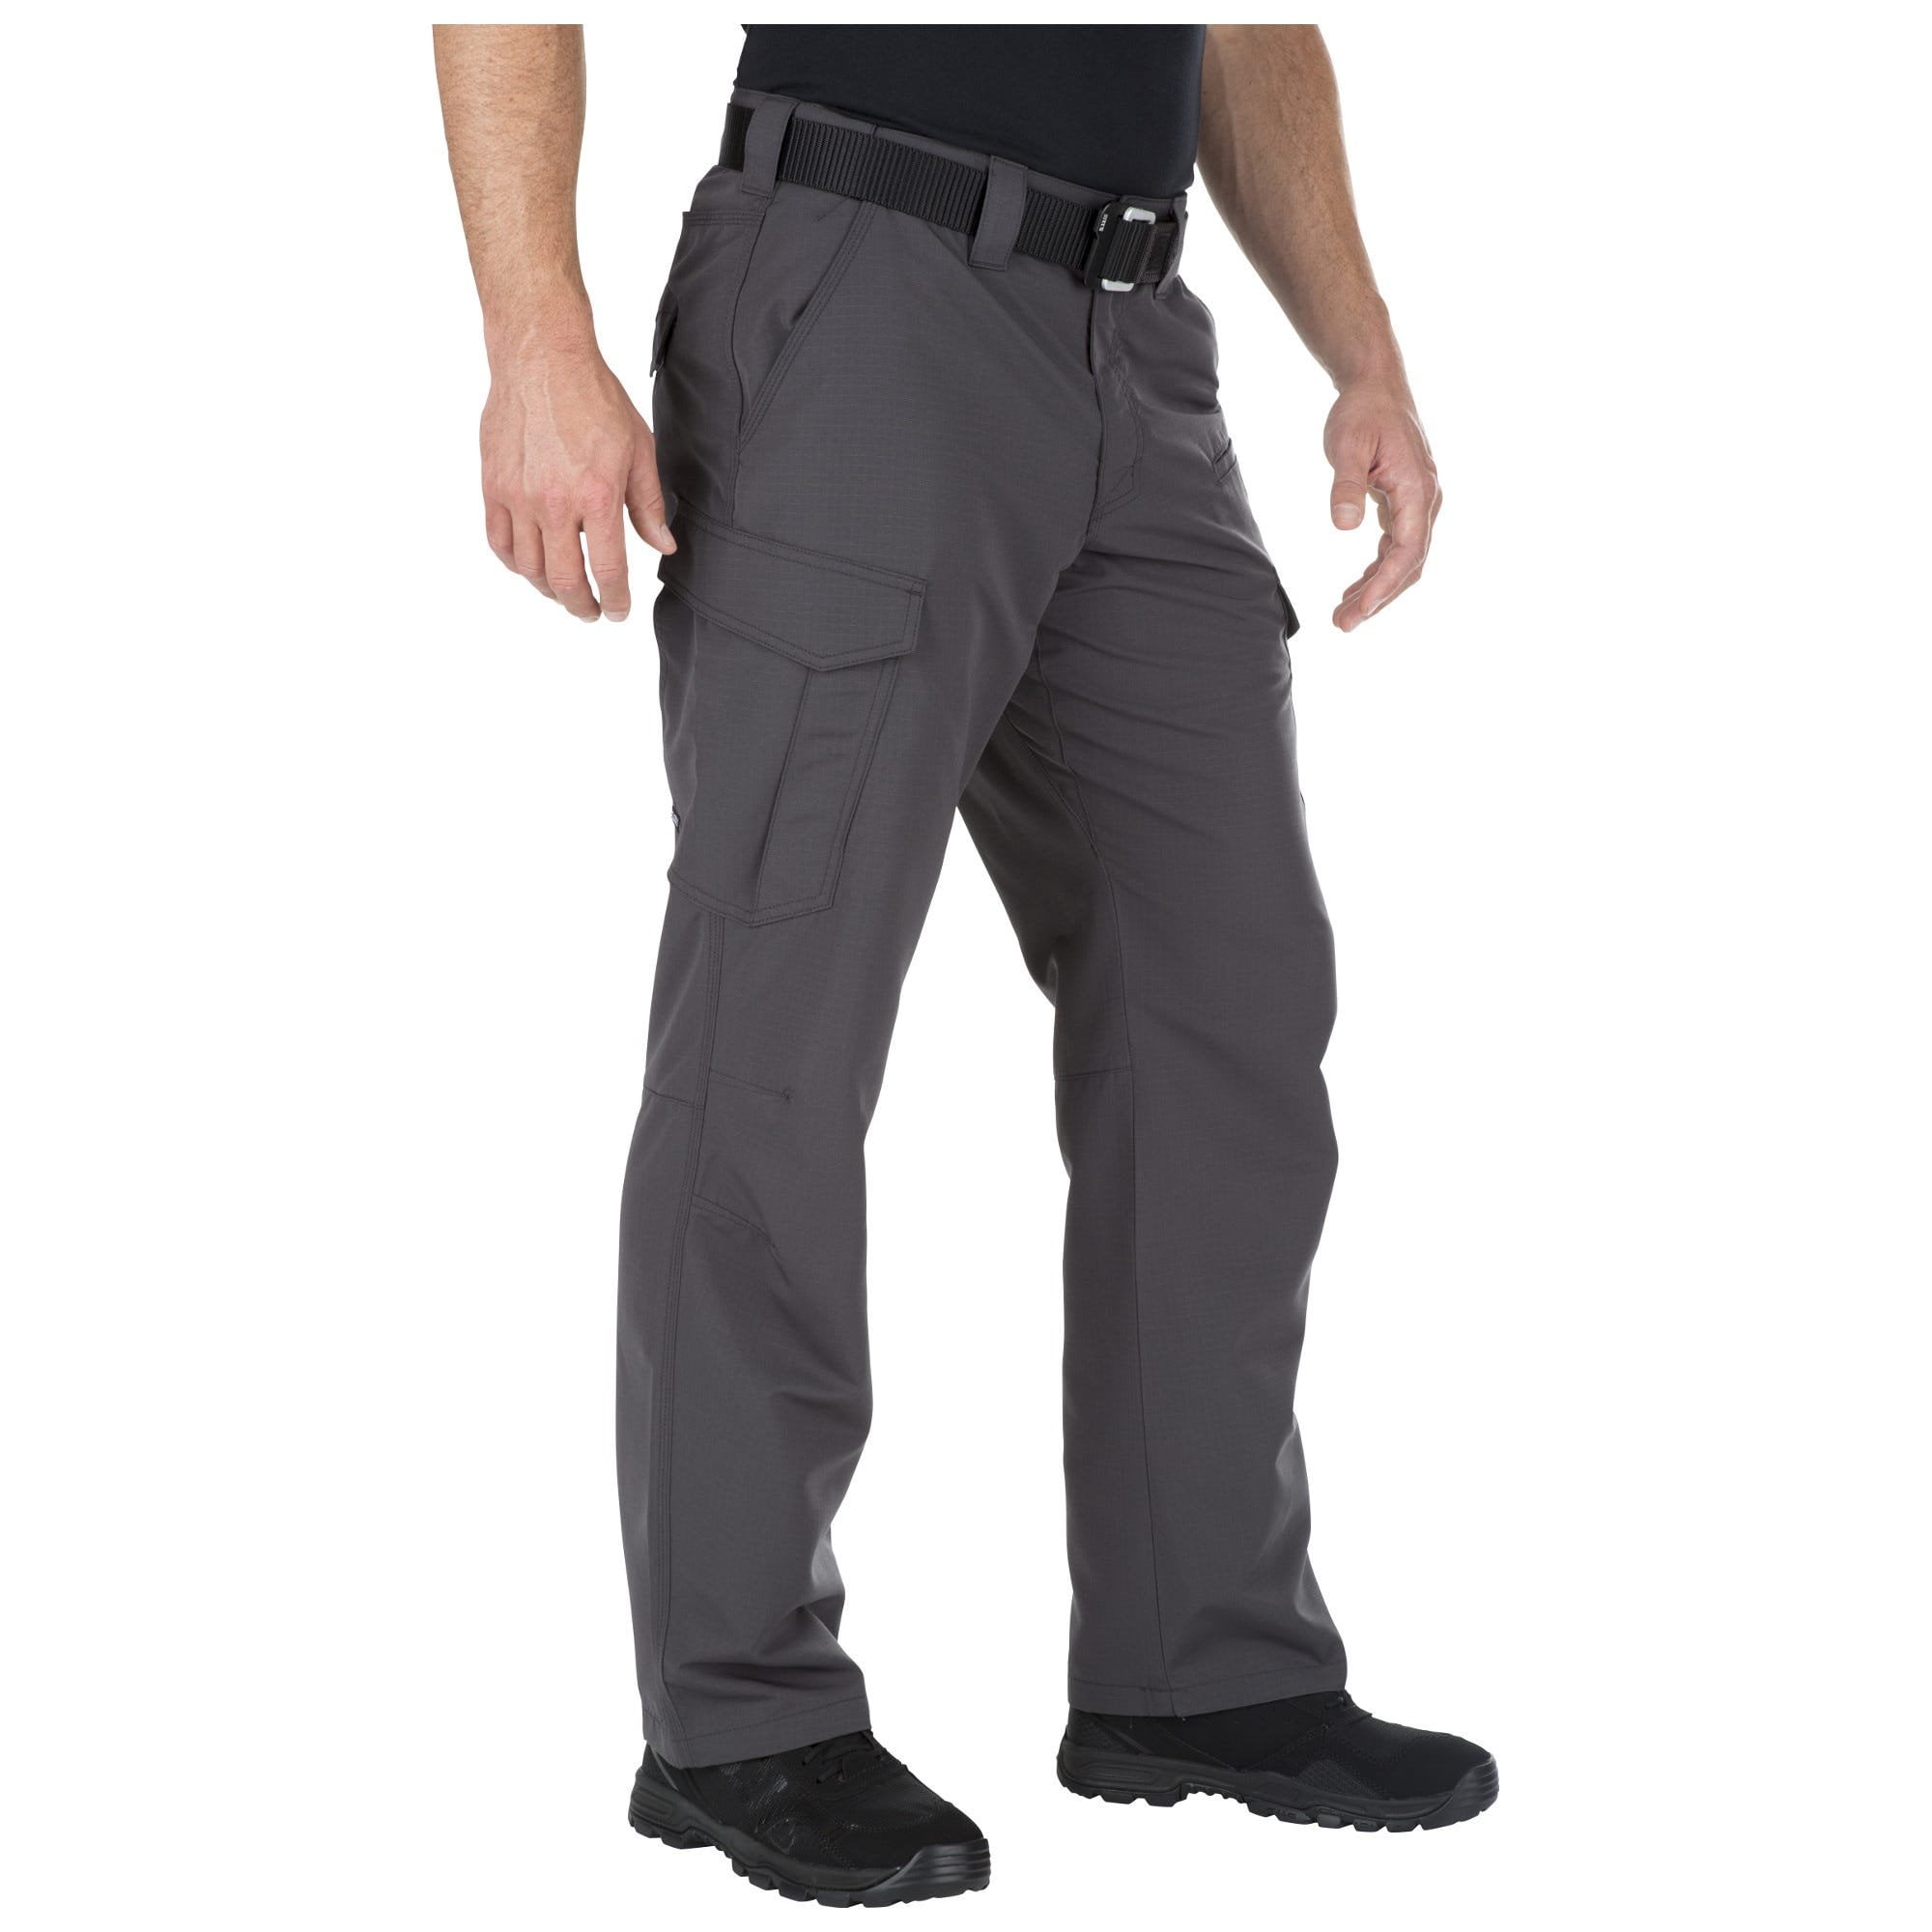 Dual Magazine Pockets Water-Resistant Finish 5.11 Tactical Mens Fast-Tac Cargo Pants Style 74439